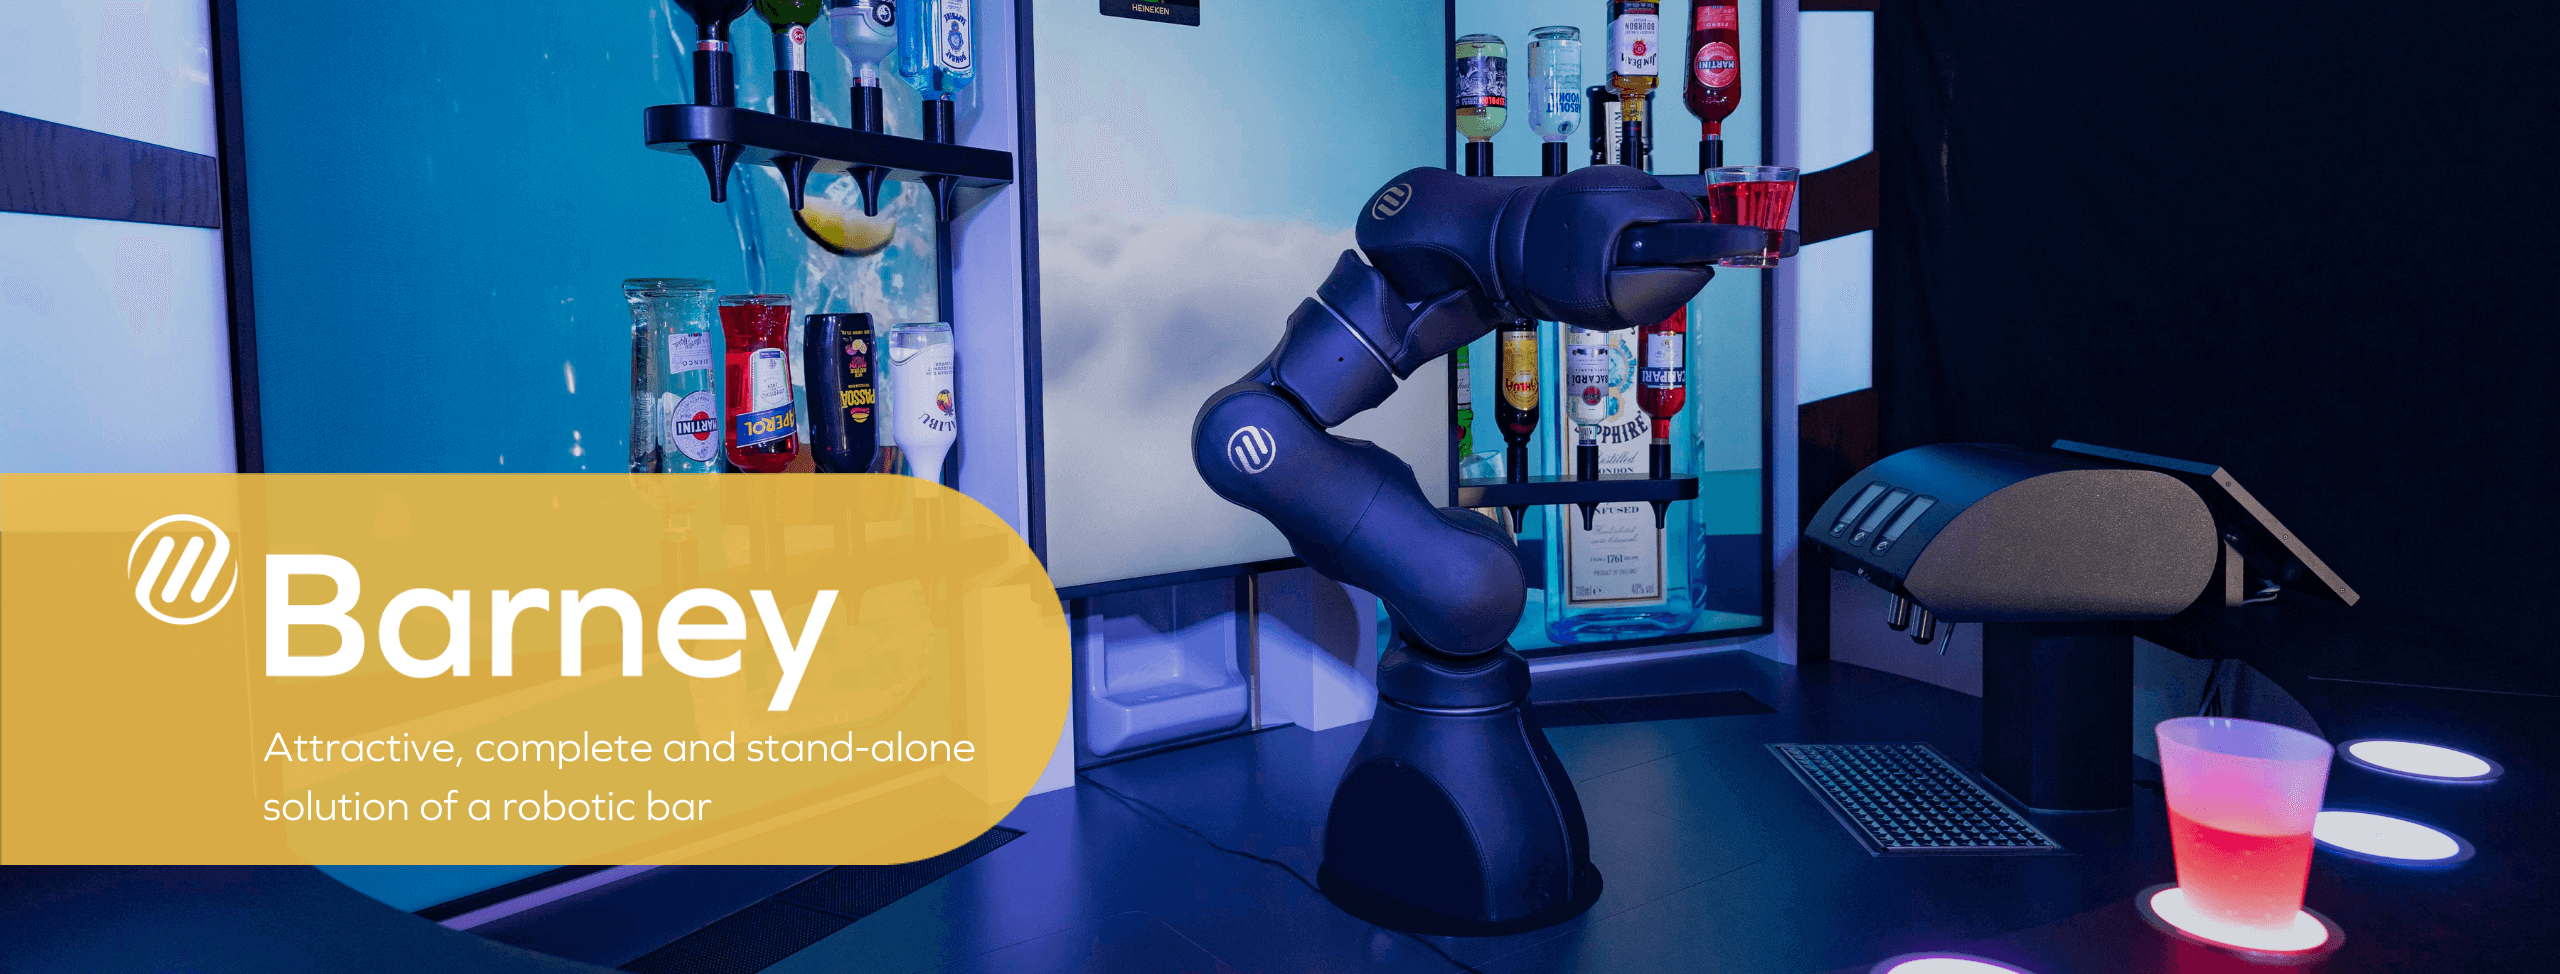 Hospitality Robotics - Attractive, complete and stand-alone robotic solutions for hospitality